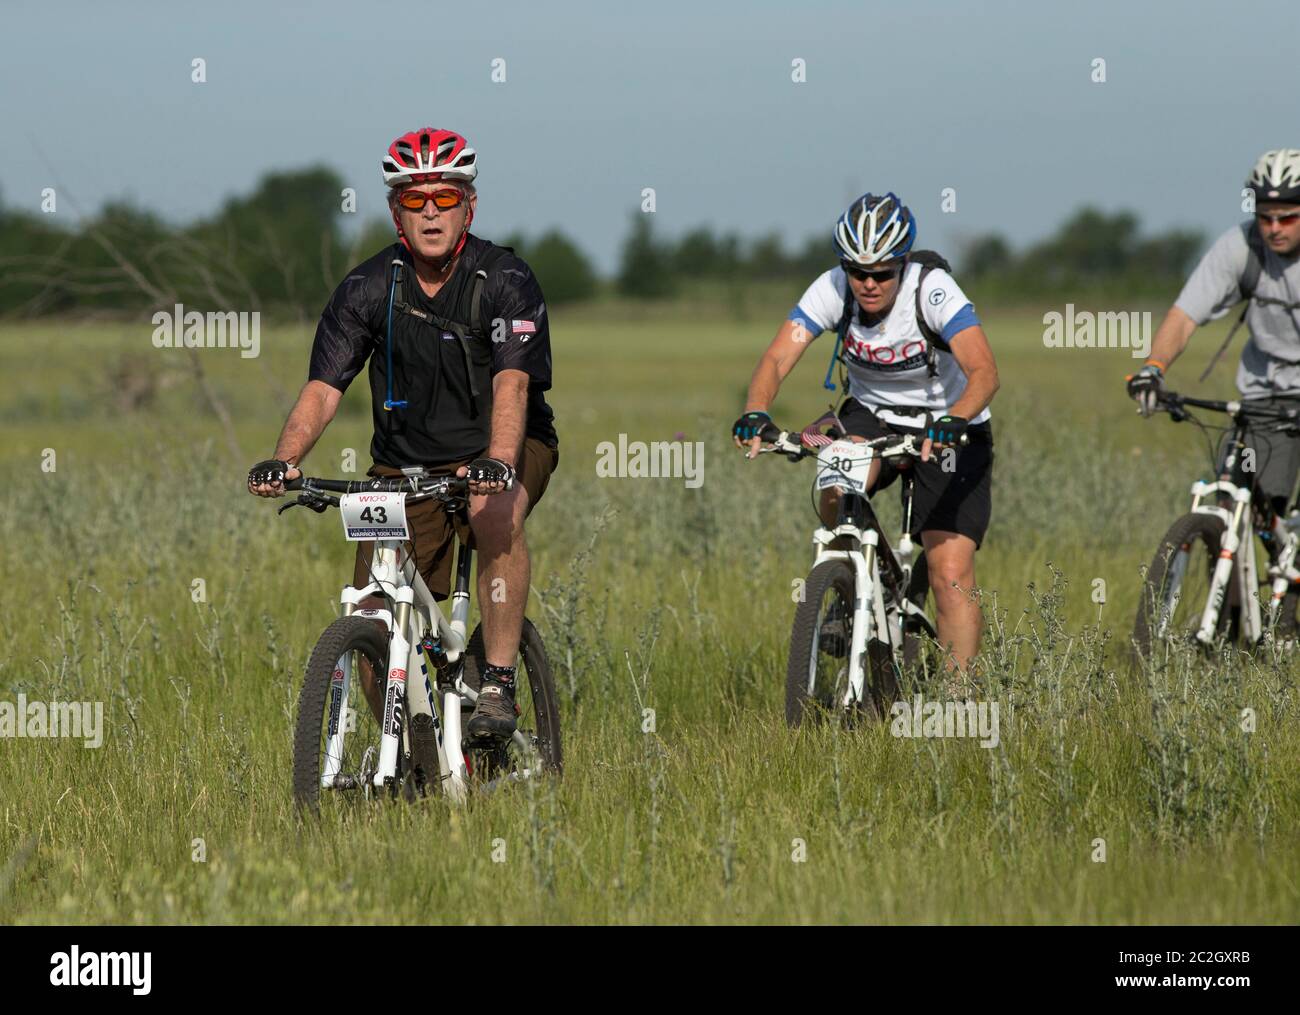 Crawford Texas USA, May 2 2014: Former President George W. Bush leads a pack of bicycle riders through his Prairie Chapel Ranch outside Crawford in the fourth annual Wounded Warrior 100K. The three-day event featured 17 invited U.S. soldiers injured in recent combat in Iraq and Afghanistan.   ©Bob Daemmrich Stock Photo